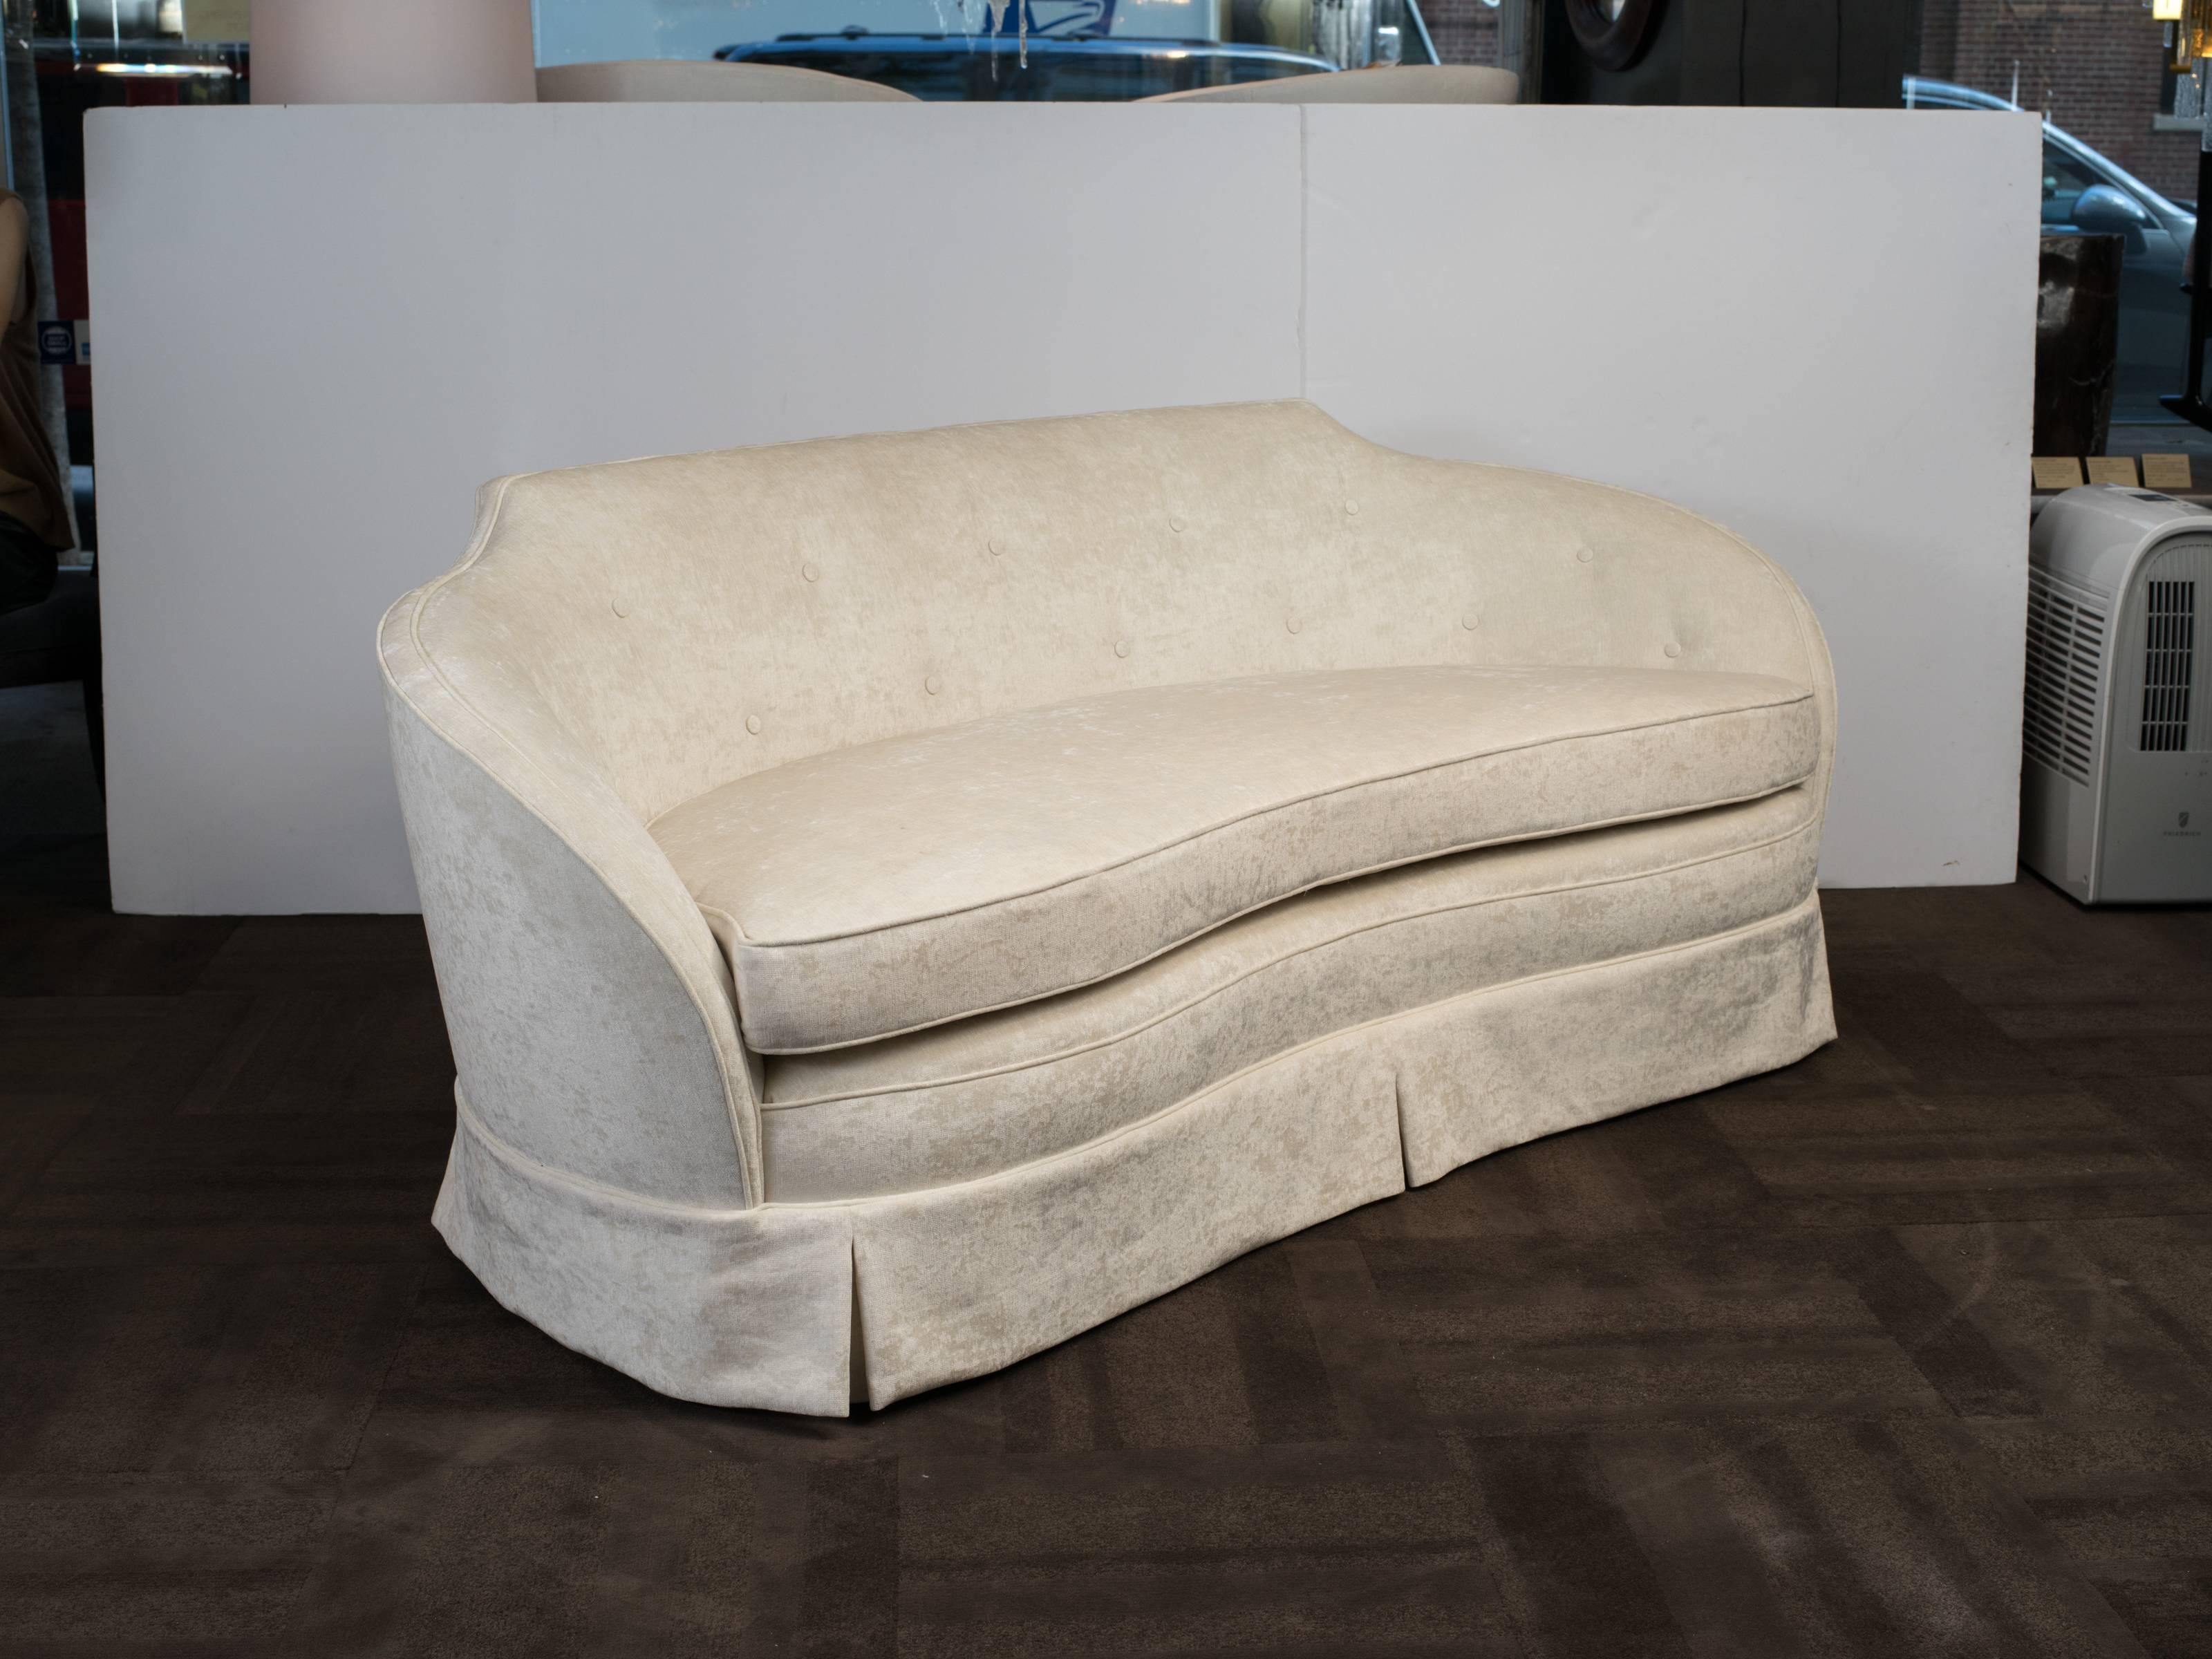 Striking Hollywood era sofa with stylized curved back/arm design. Newly reupholstered in a rich crème velvet by Castel, featuring button back details and dust ruffle. Comfortably sits up to four people.